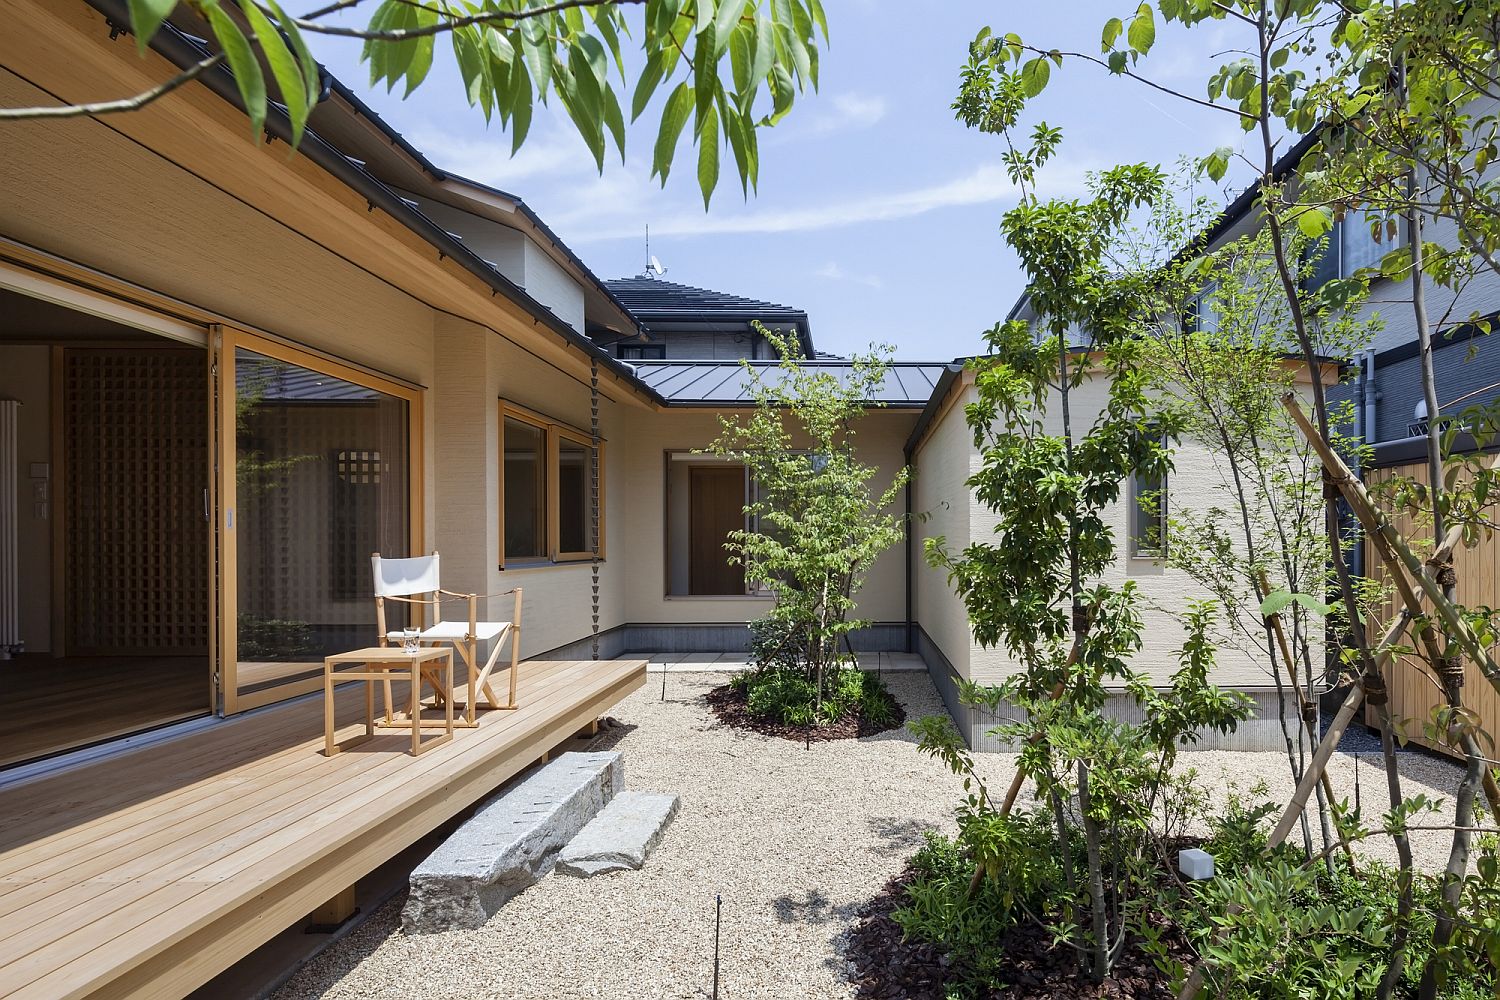 Contemporary courtyard and small wooden deck of the Japanese home